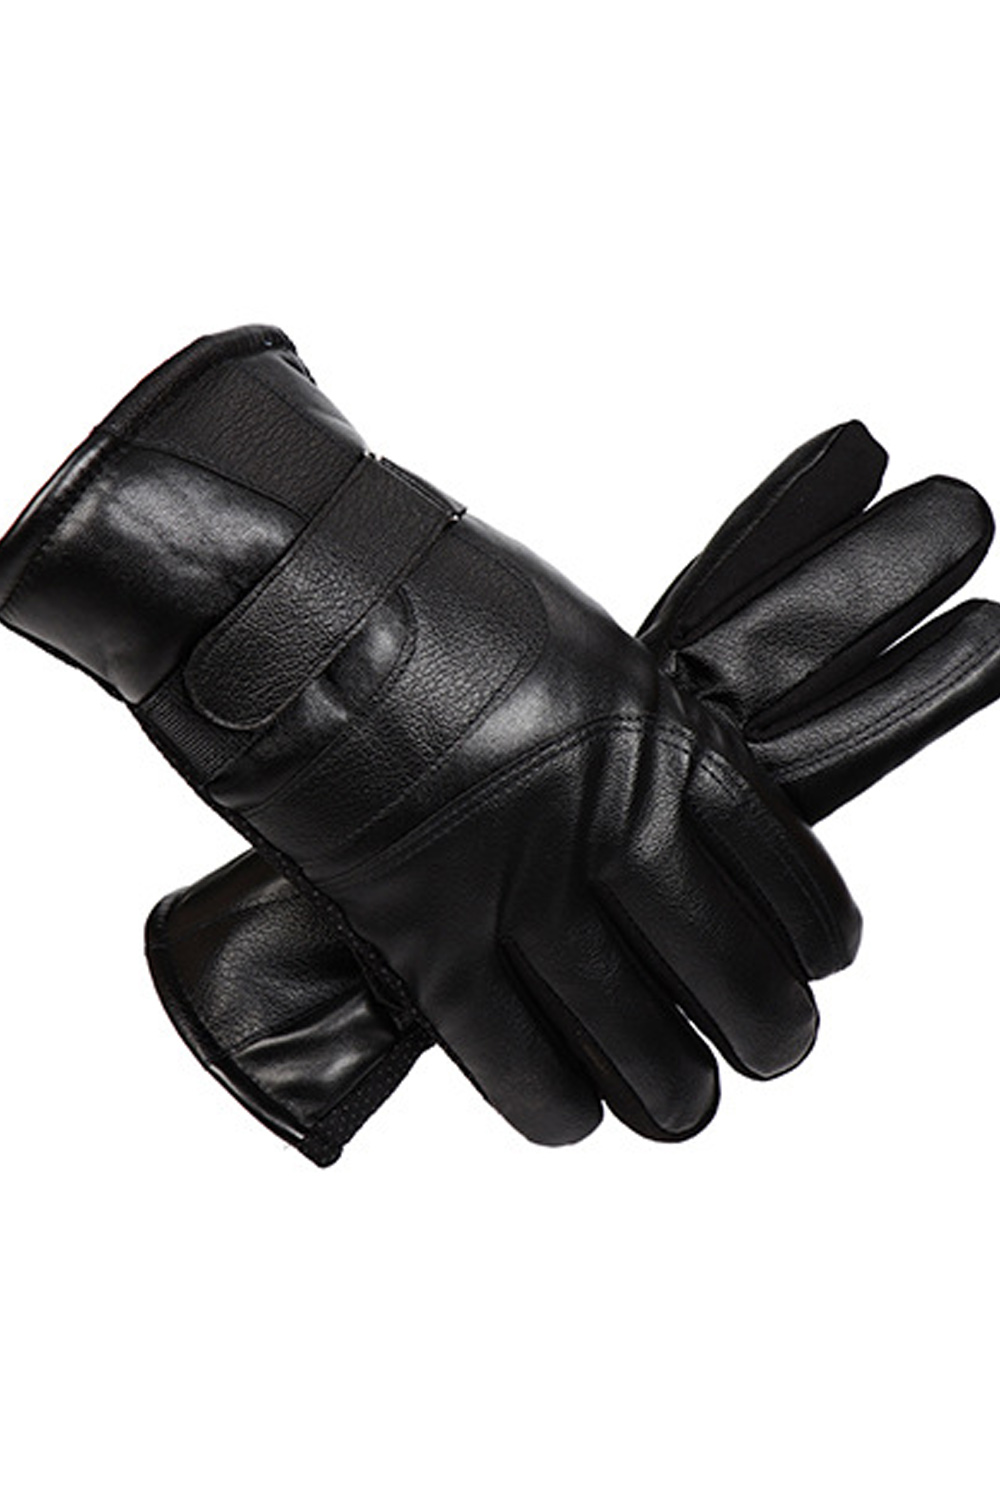 Selected Color is Full Leather Big Seven Men's Black